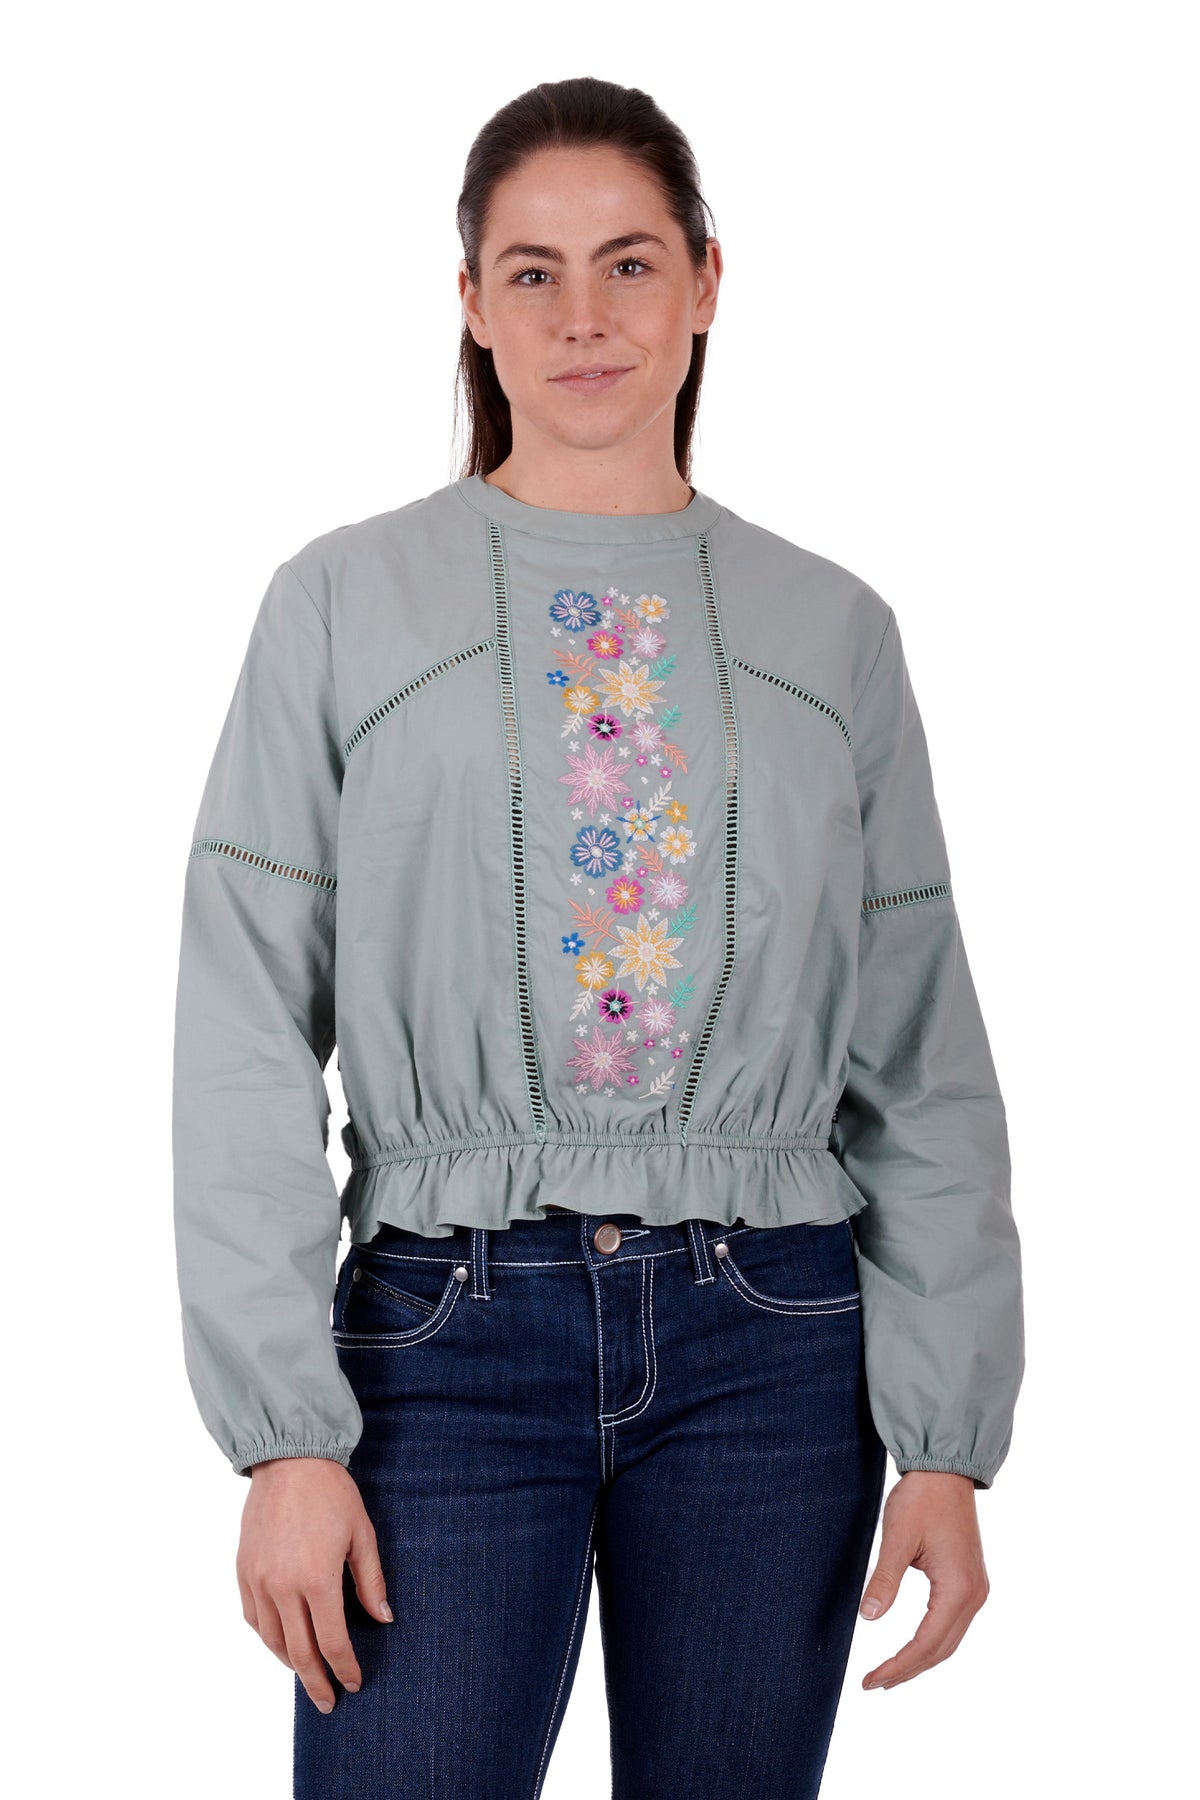 Wrangler Womens Ryleigh Blouse - Lily Pad